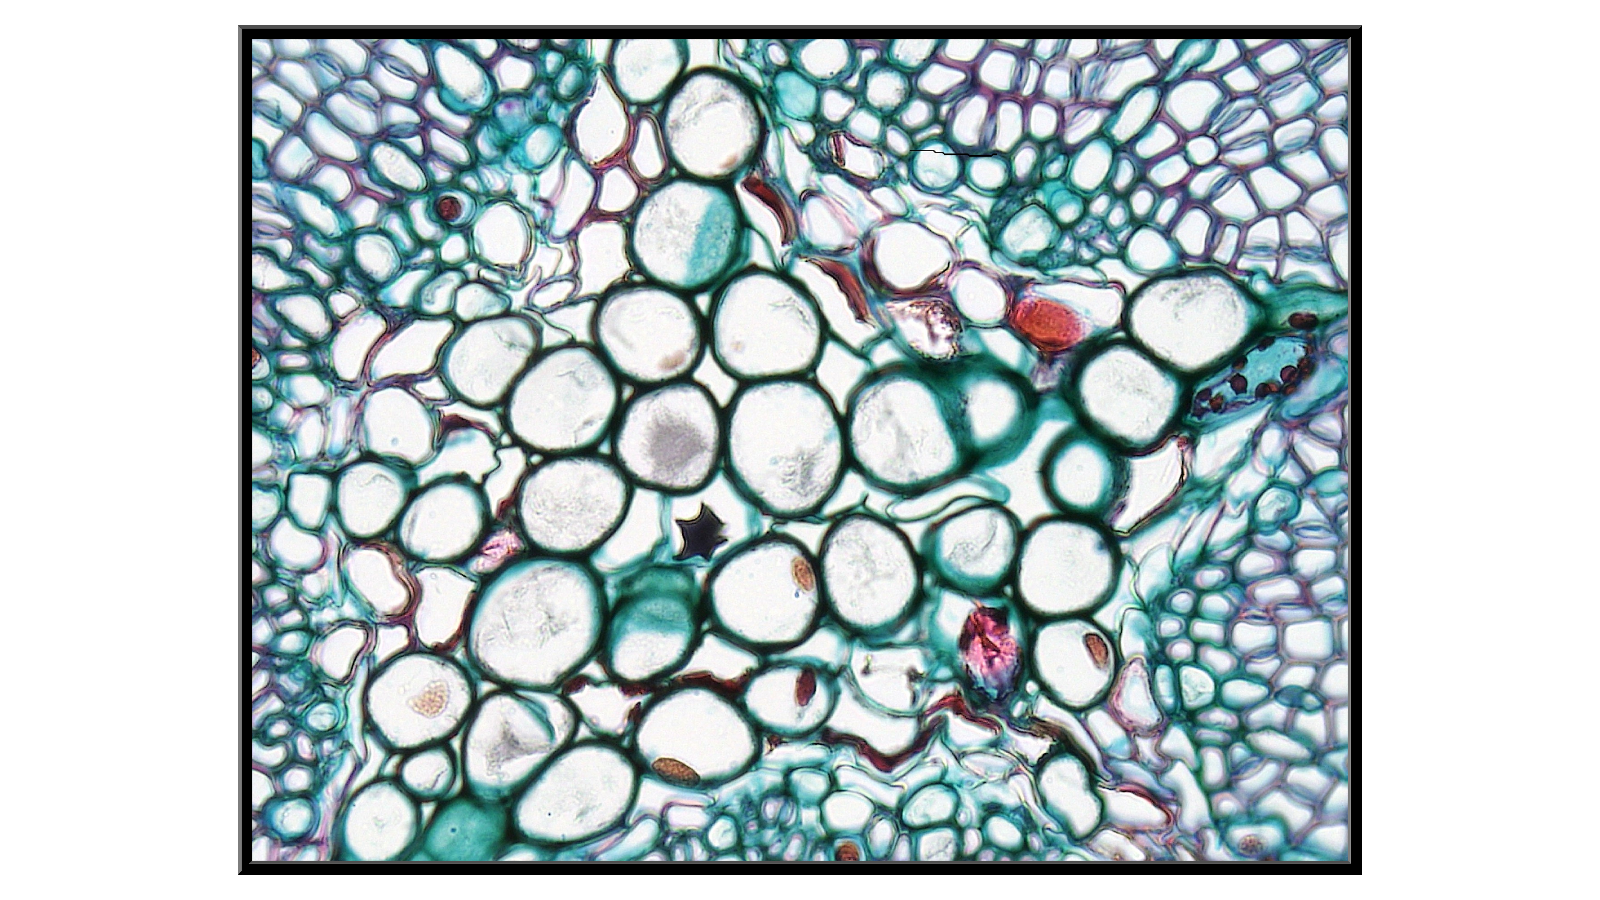 Cross-section of a 2-year-old pine stem x400